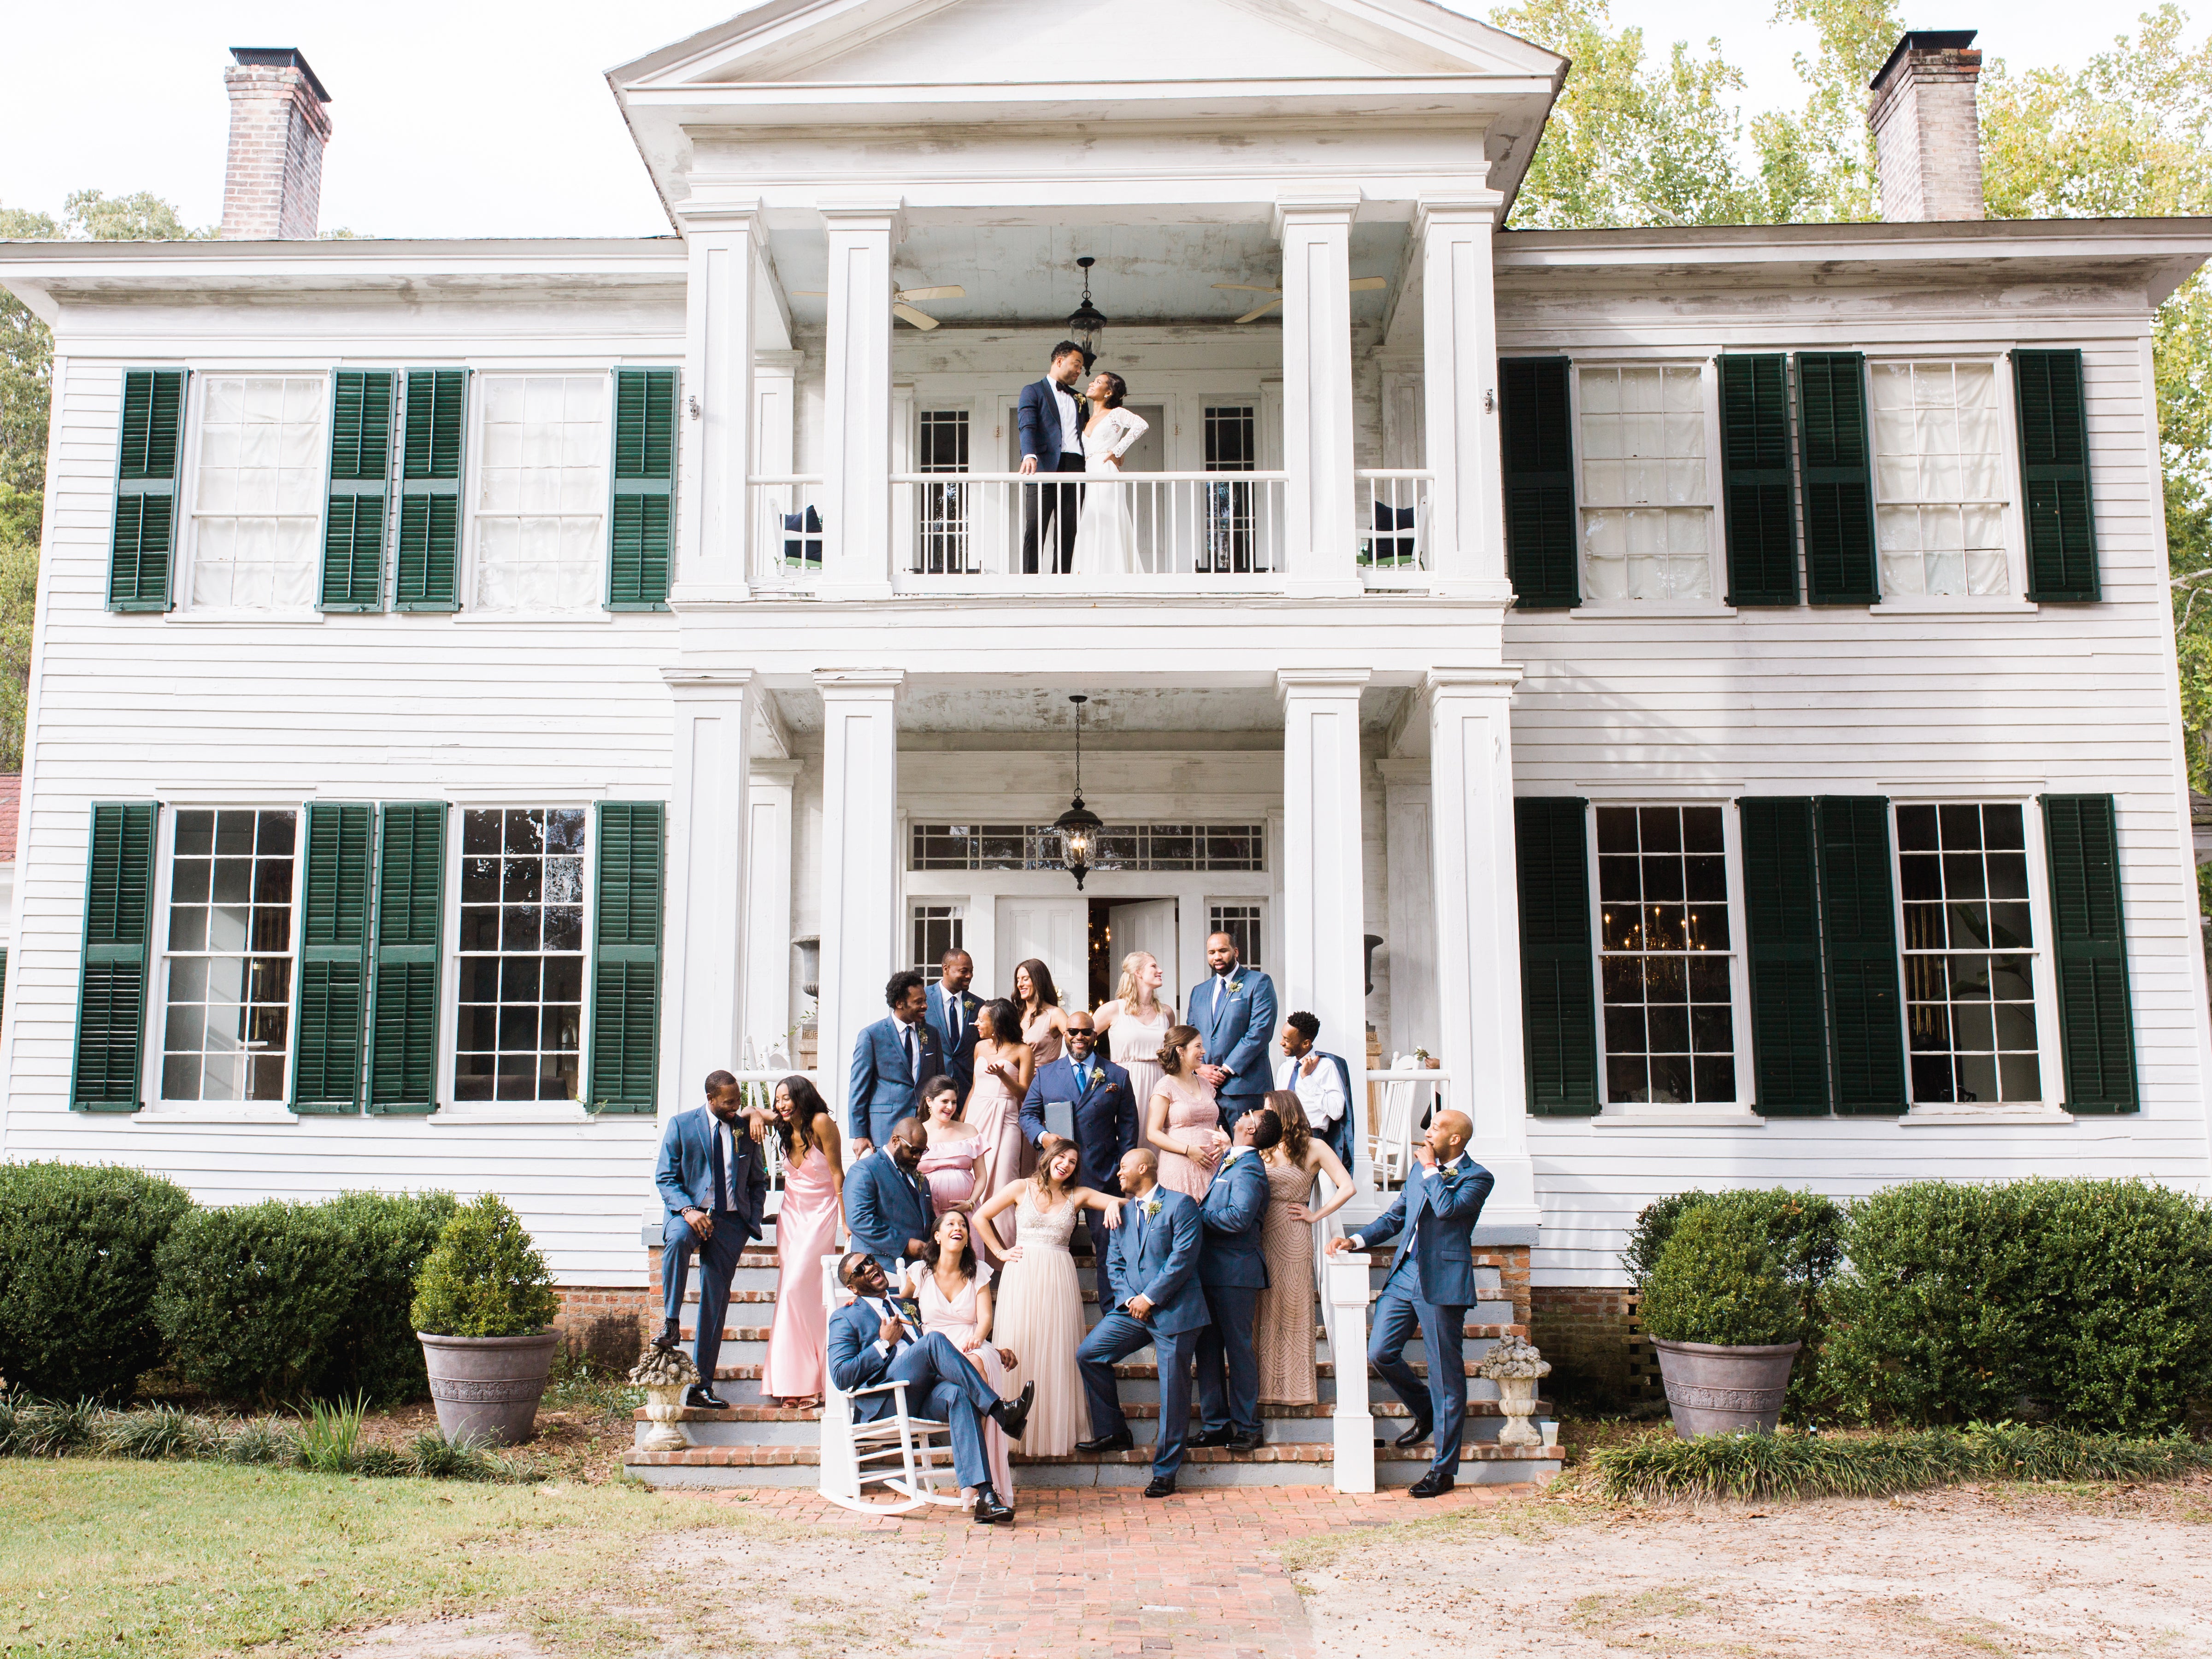 Bridal Bliss: We're Obsessed With Jason And Elena's Charming Southern Wedding Style
